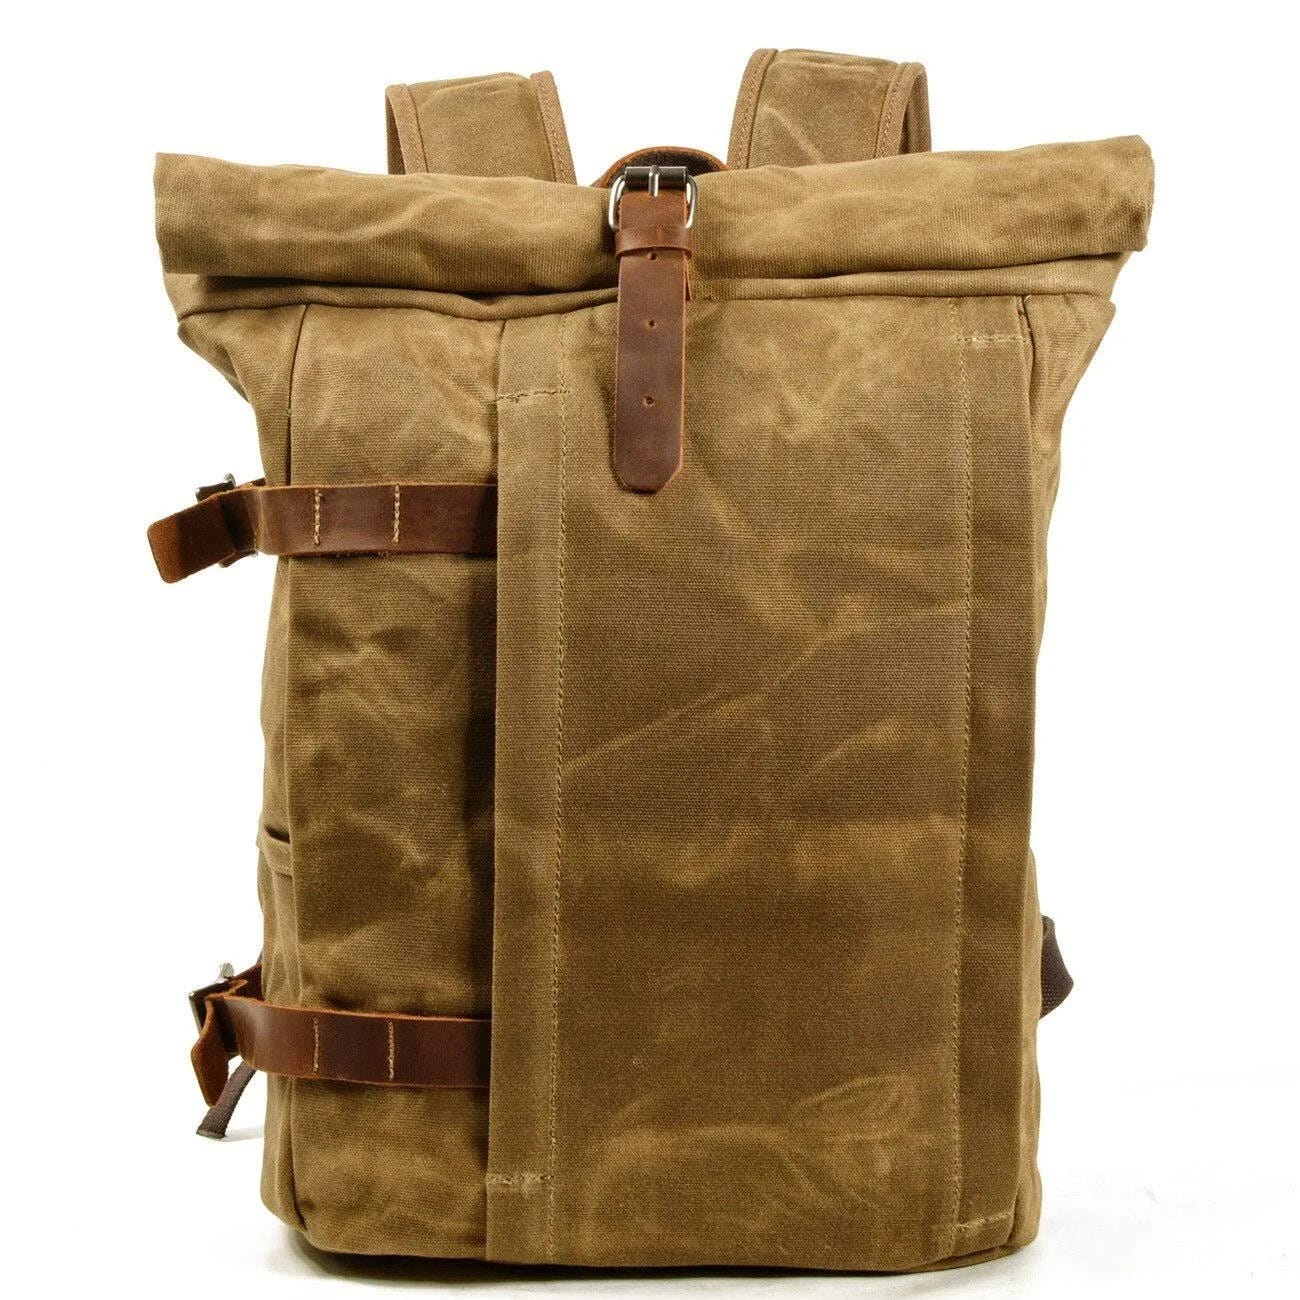 Vintage Waxed Canvas Rolltop Backpack - Classic Khaki Design | Image